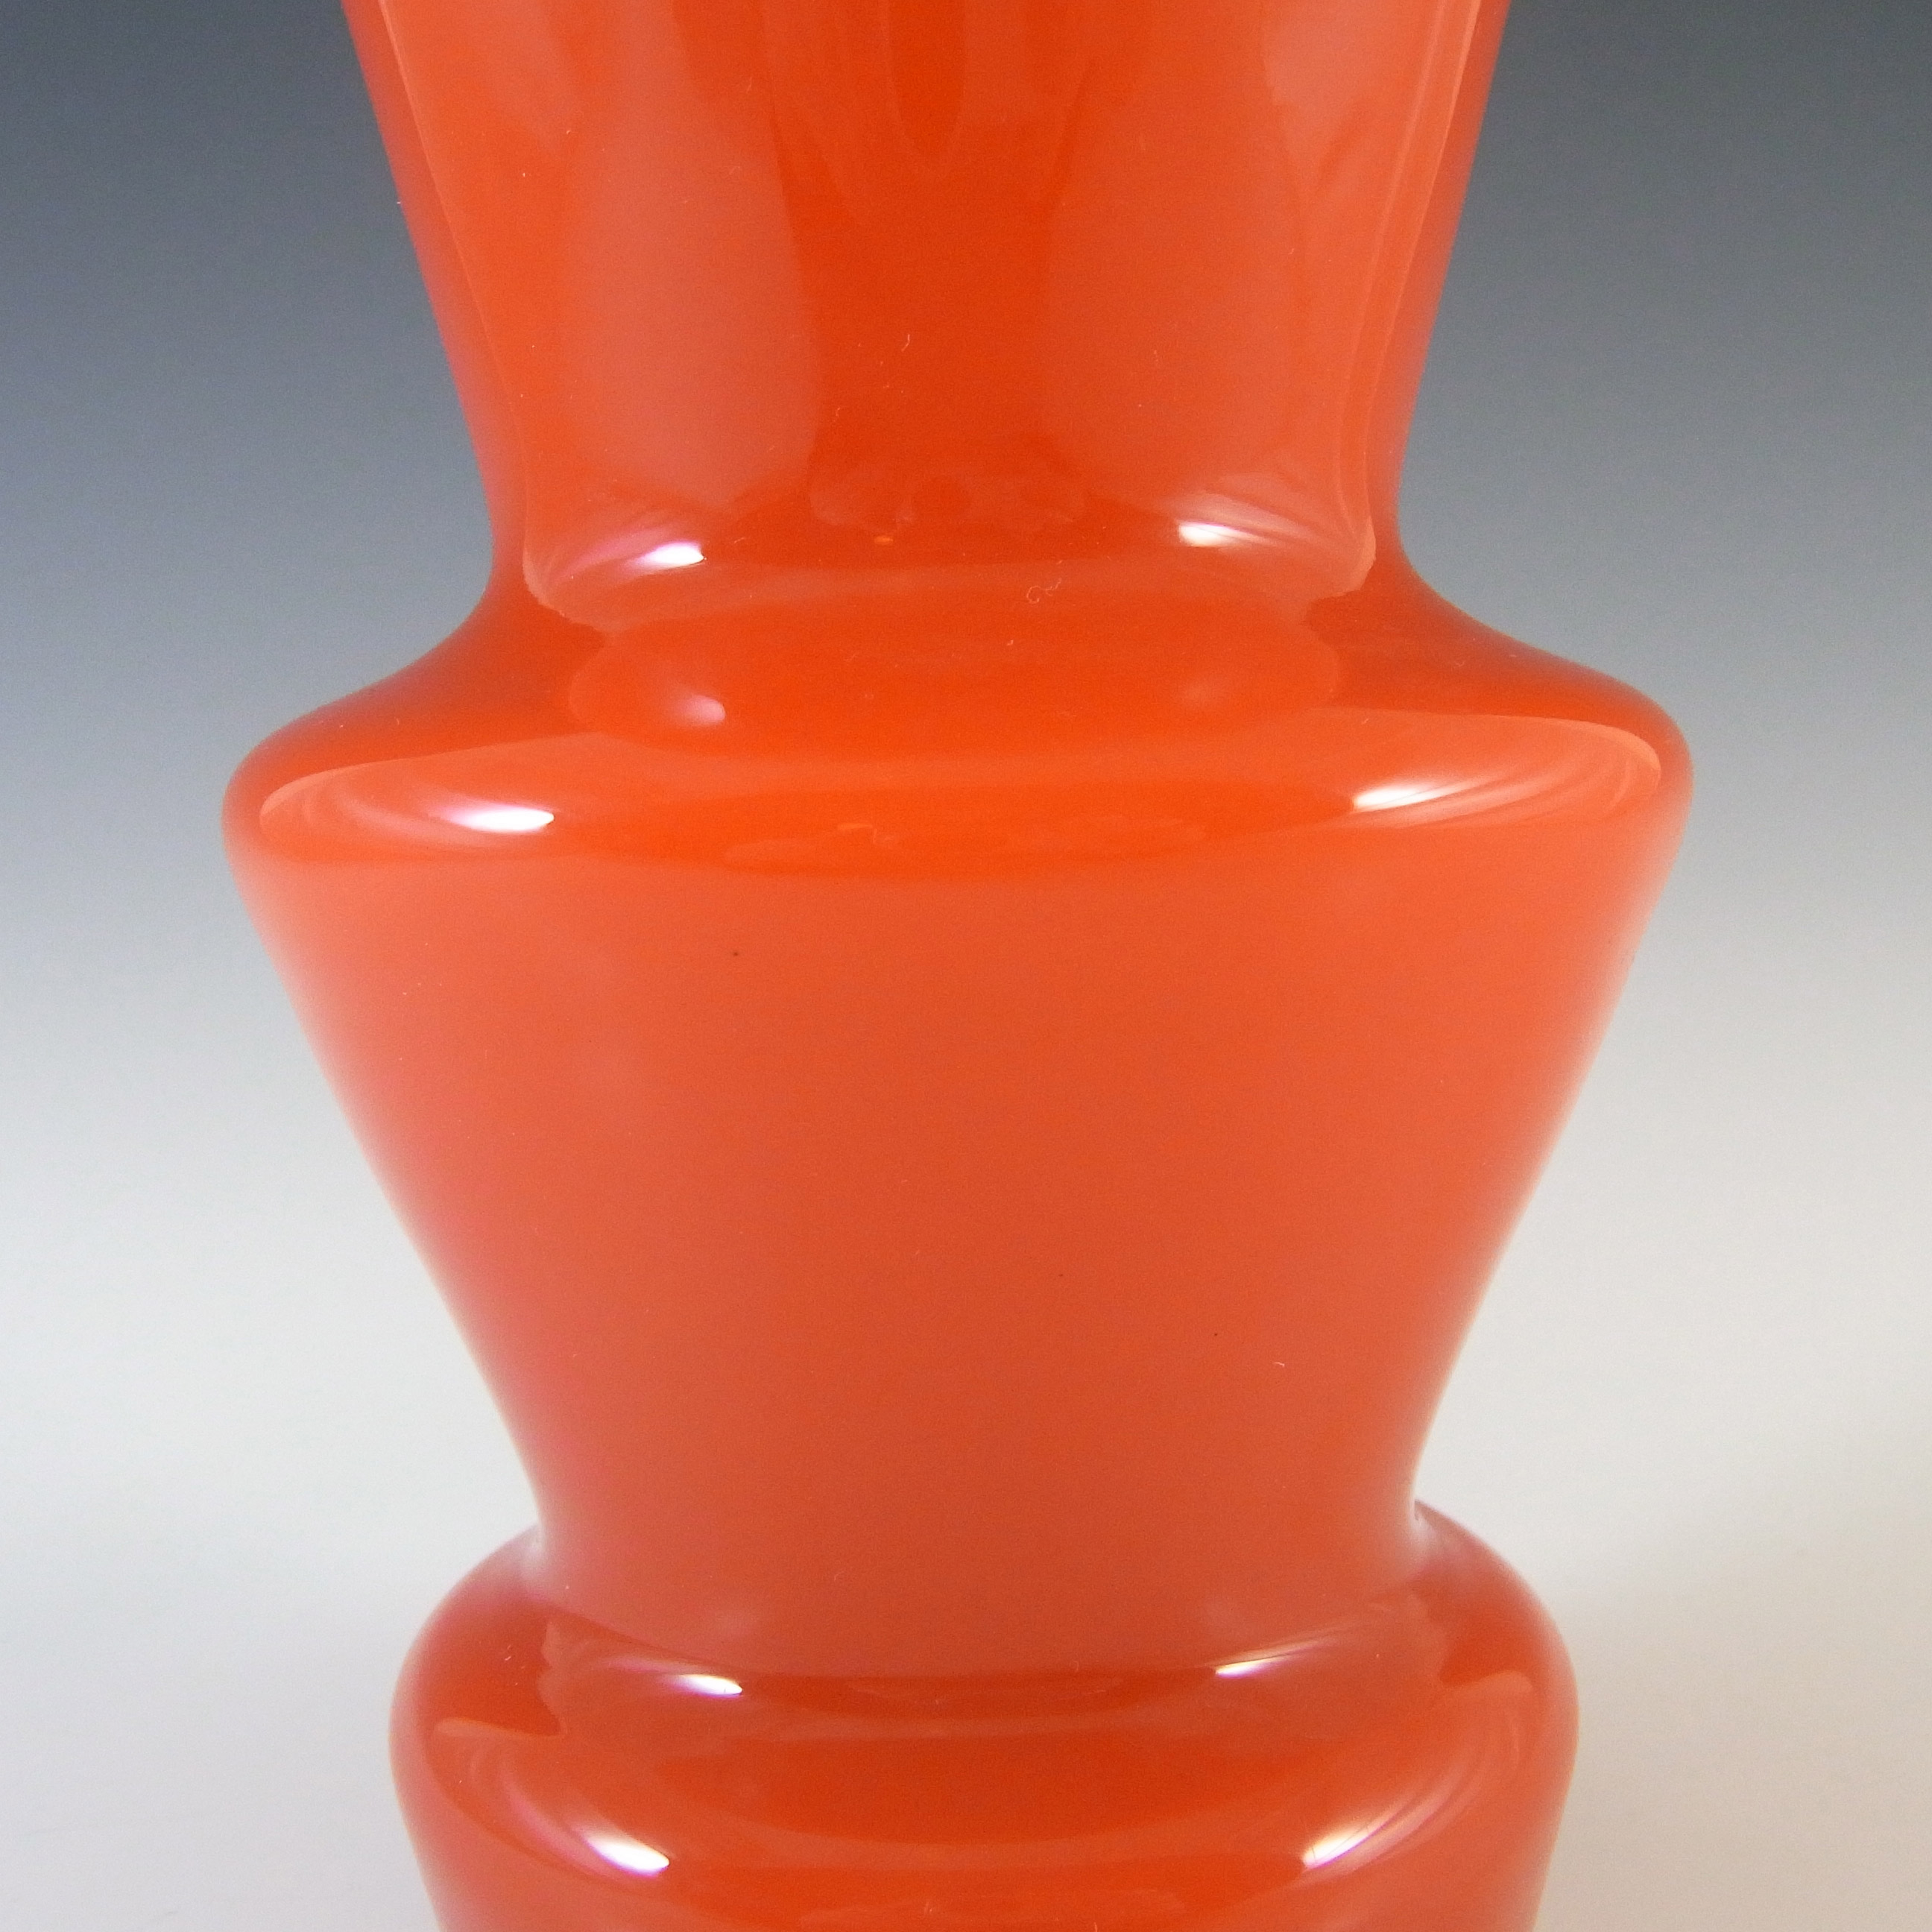 Lindshammar / Alsterbro / JC Swedish Red Hooped Glass Vase - Click Image to Close